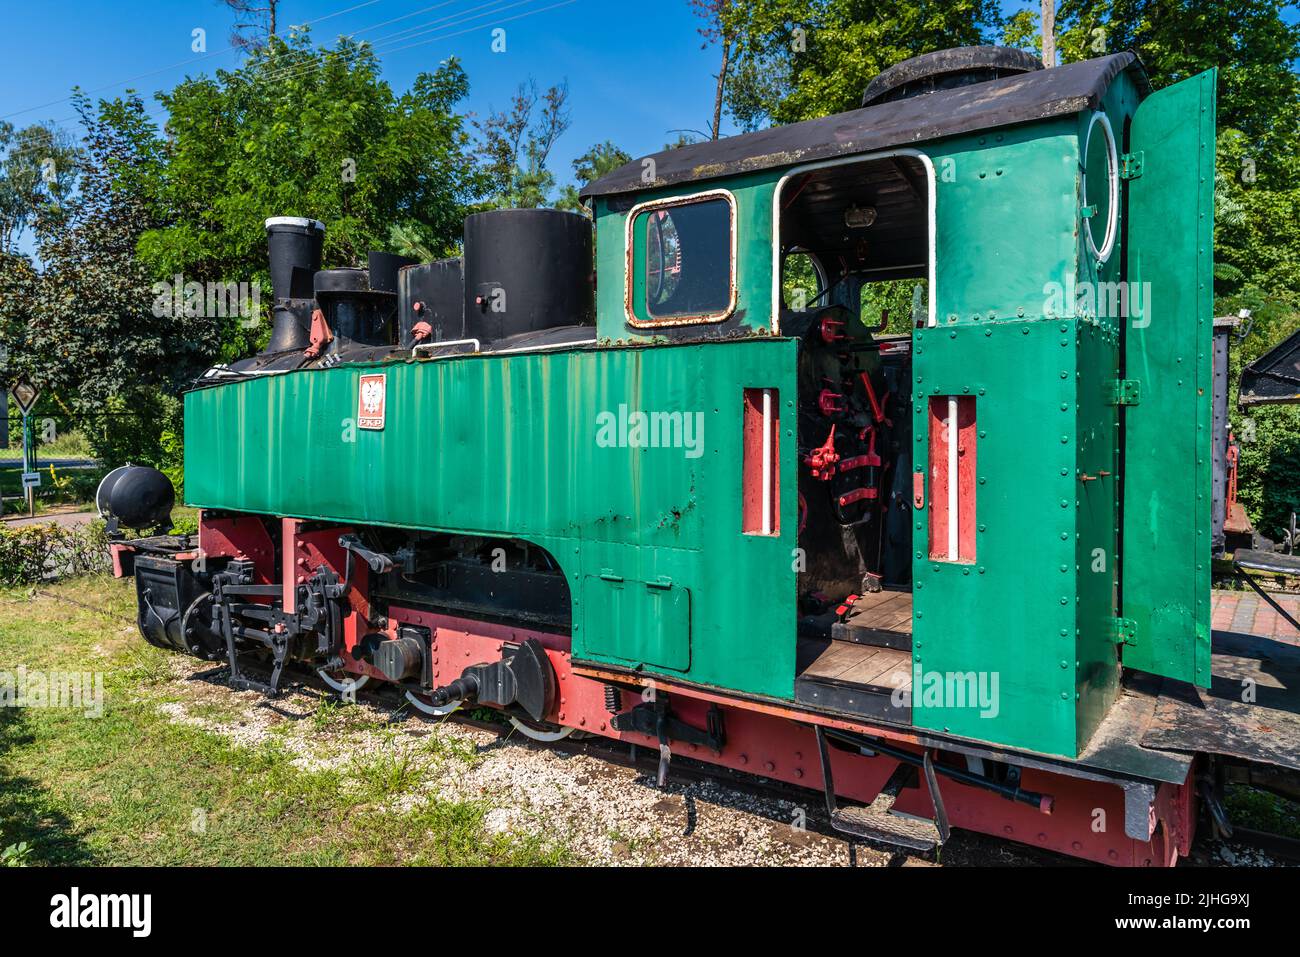 Wenecja, Poland - July 2020 : The old disused narrow gauge train locomotive in the museum Stock Photo